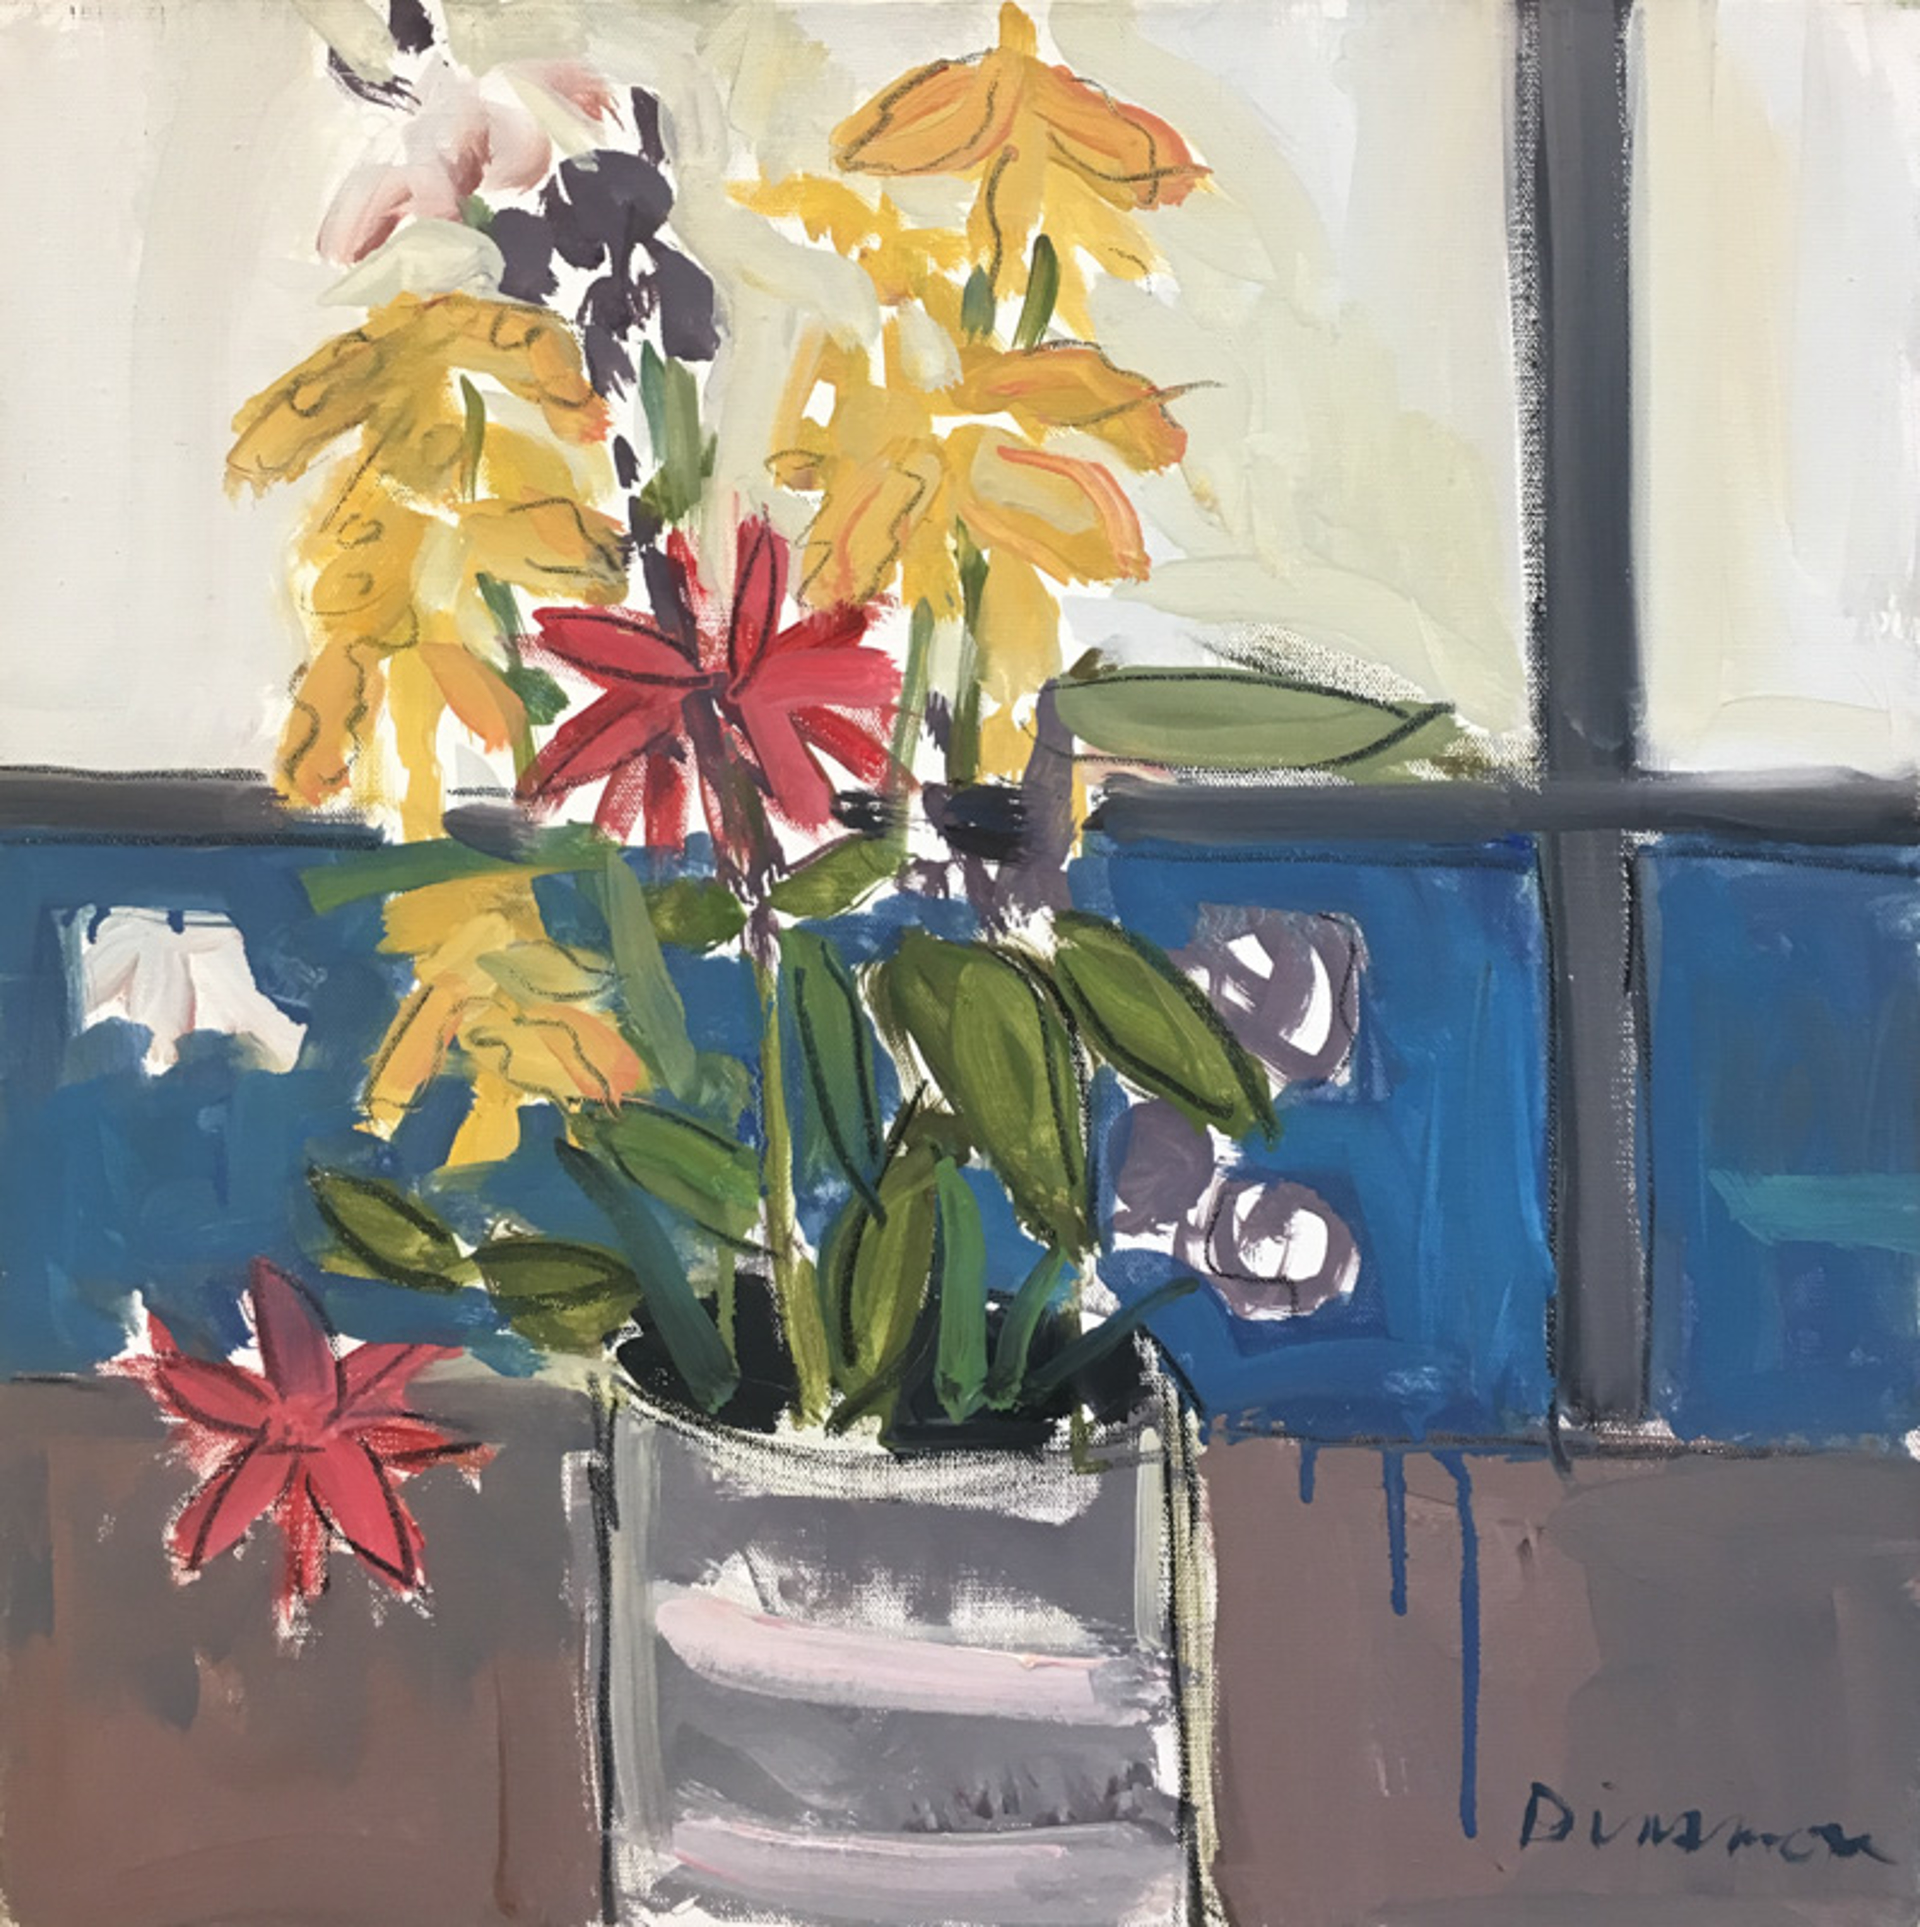 Inside Still Life and Can by Stephen Dinsmore